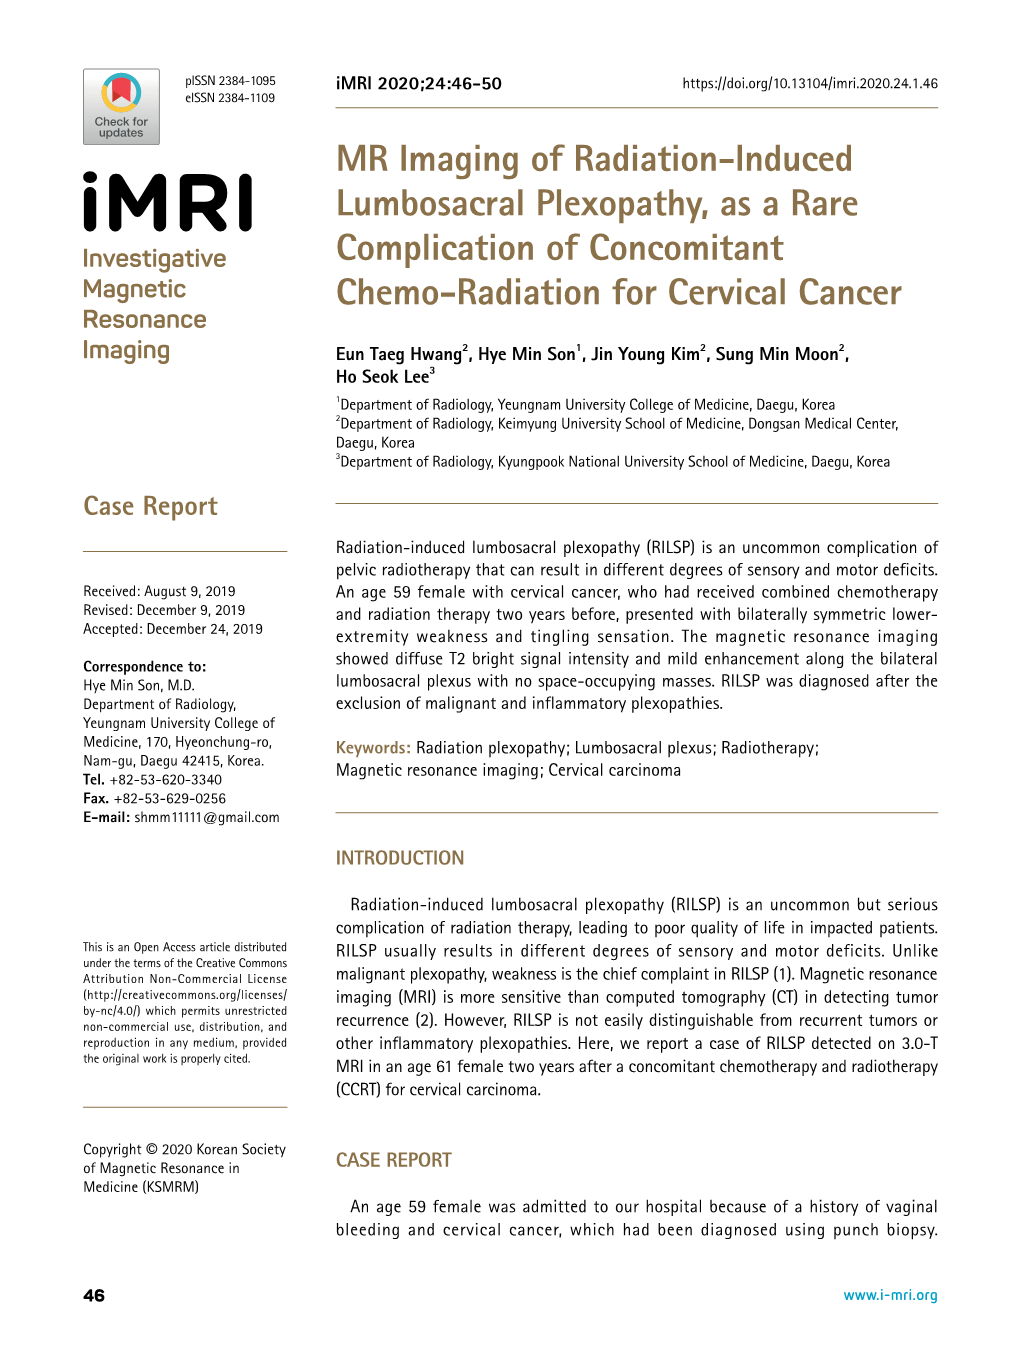 MR Imaging of Radiation-Induced Lumbosacral Plexopathy, As a Rare Complication of Concomitant Chemo-Radiation for Cervical Cancer